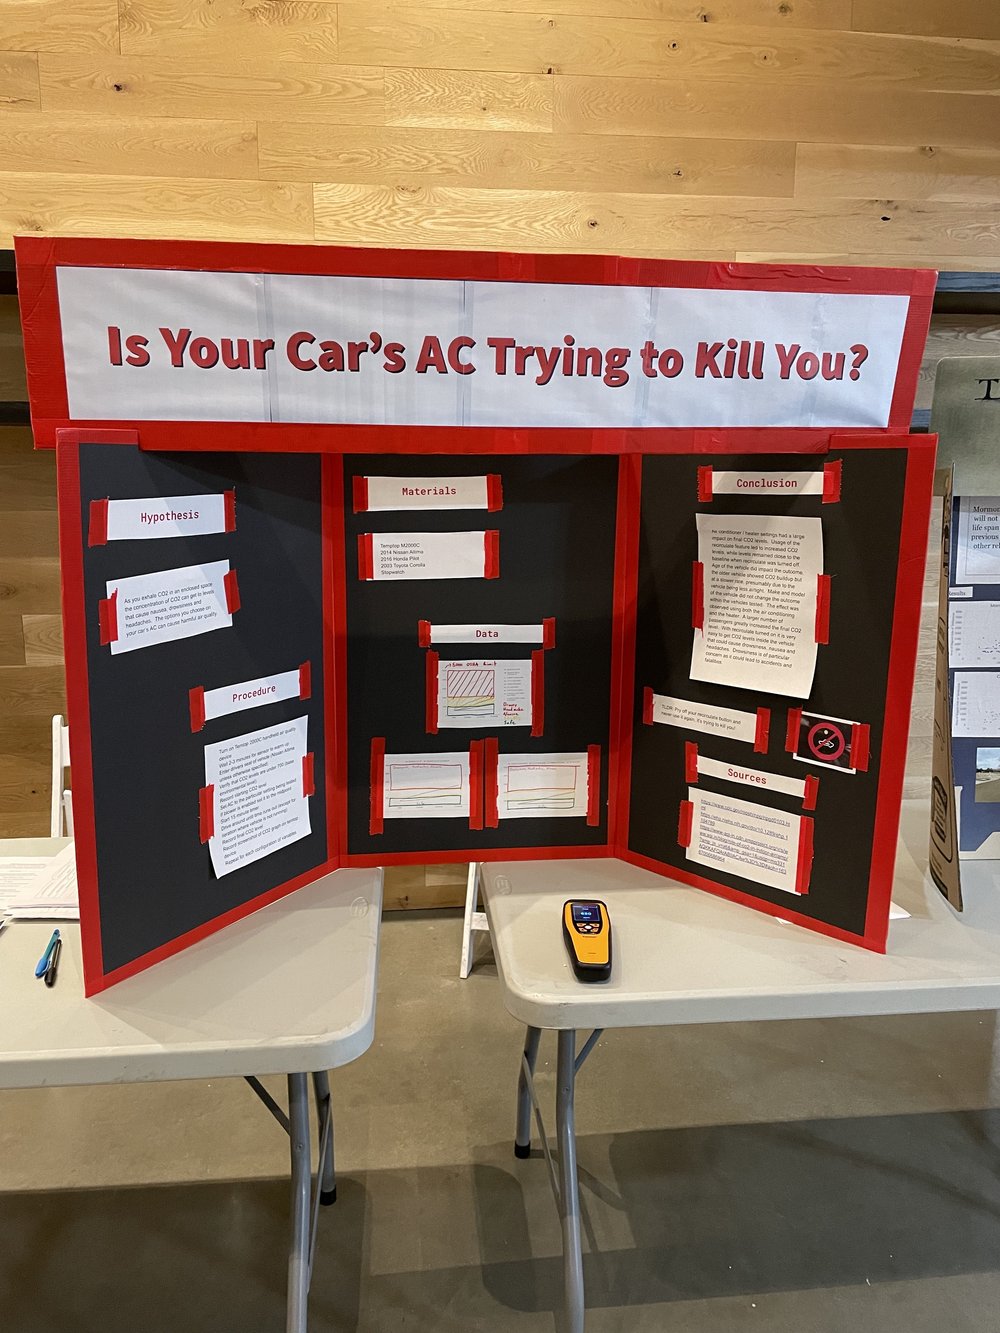 Tips And Tricks For Creating Your Science Fair Poster Board Display